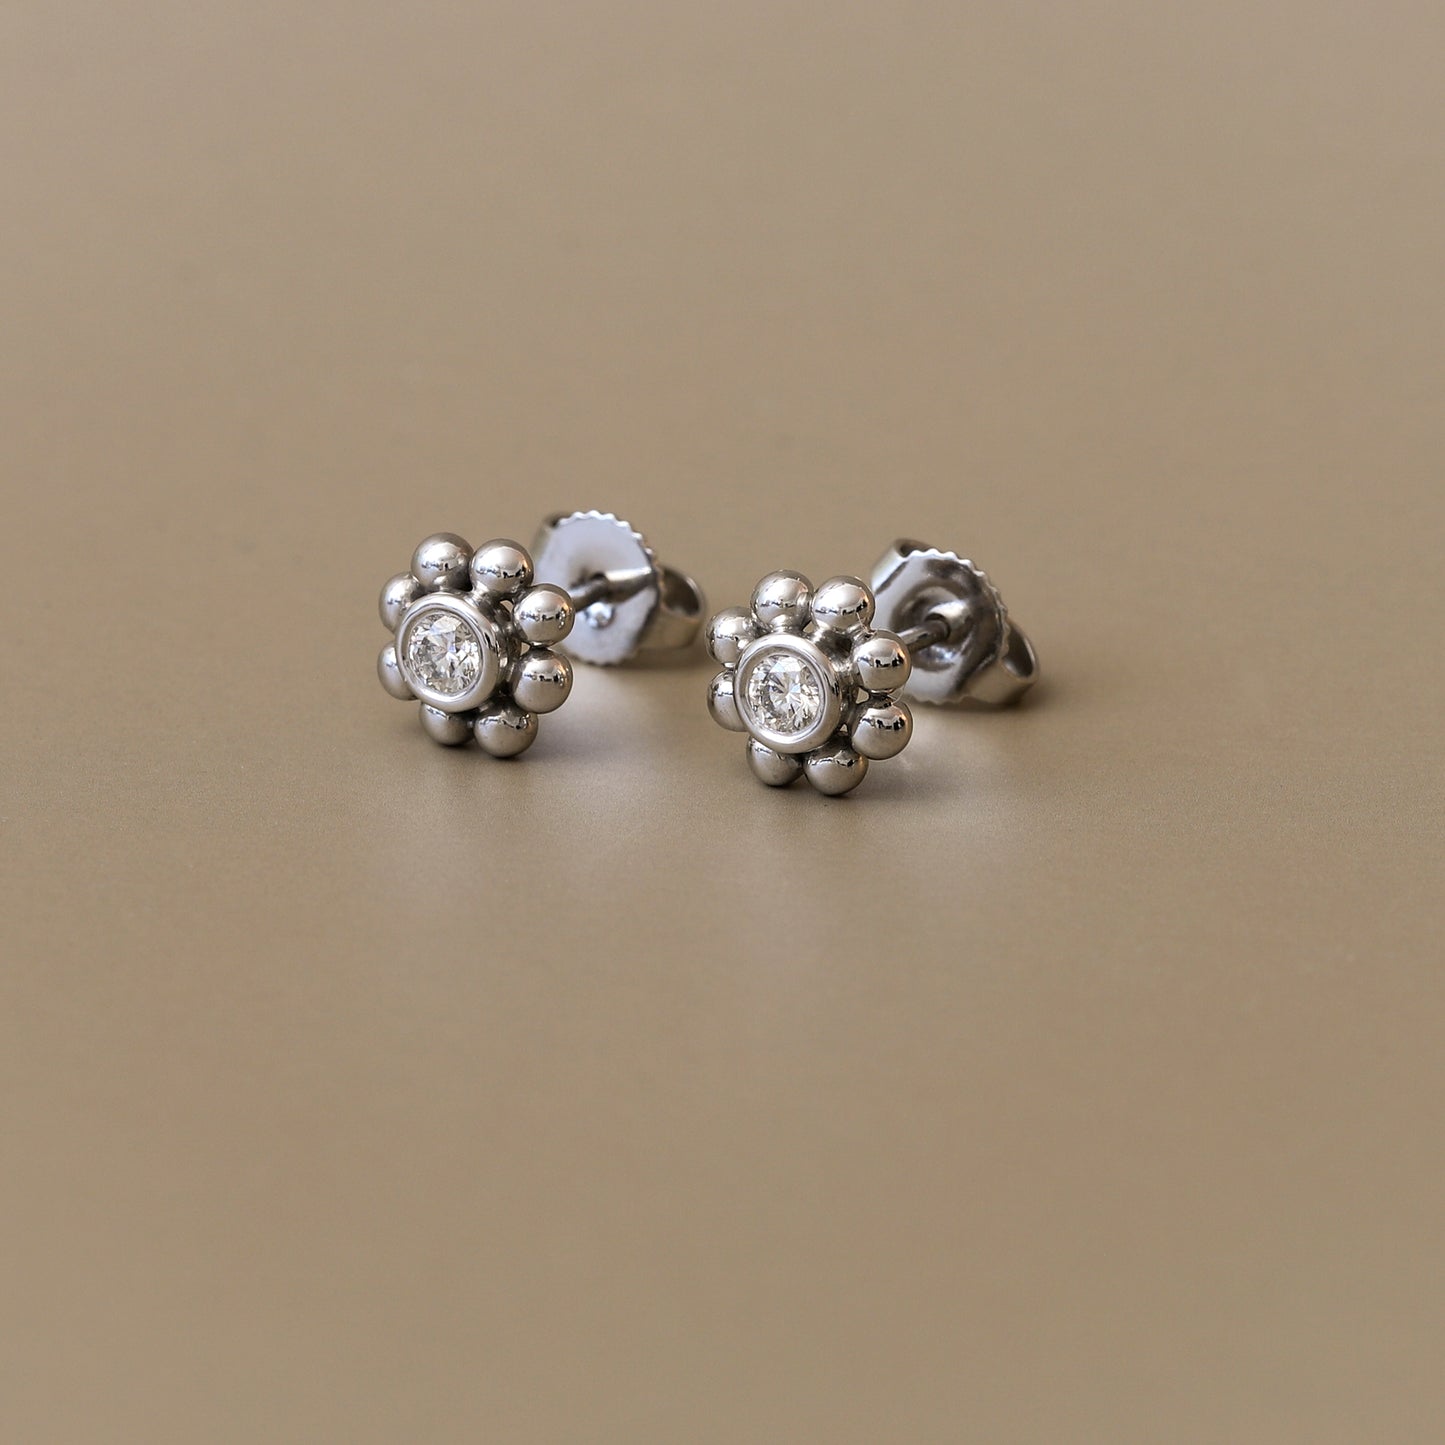 Tiffany & Co. 18k White Gold Diamond Flower Stud Earrings with Box and Receipt